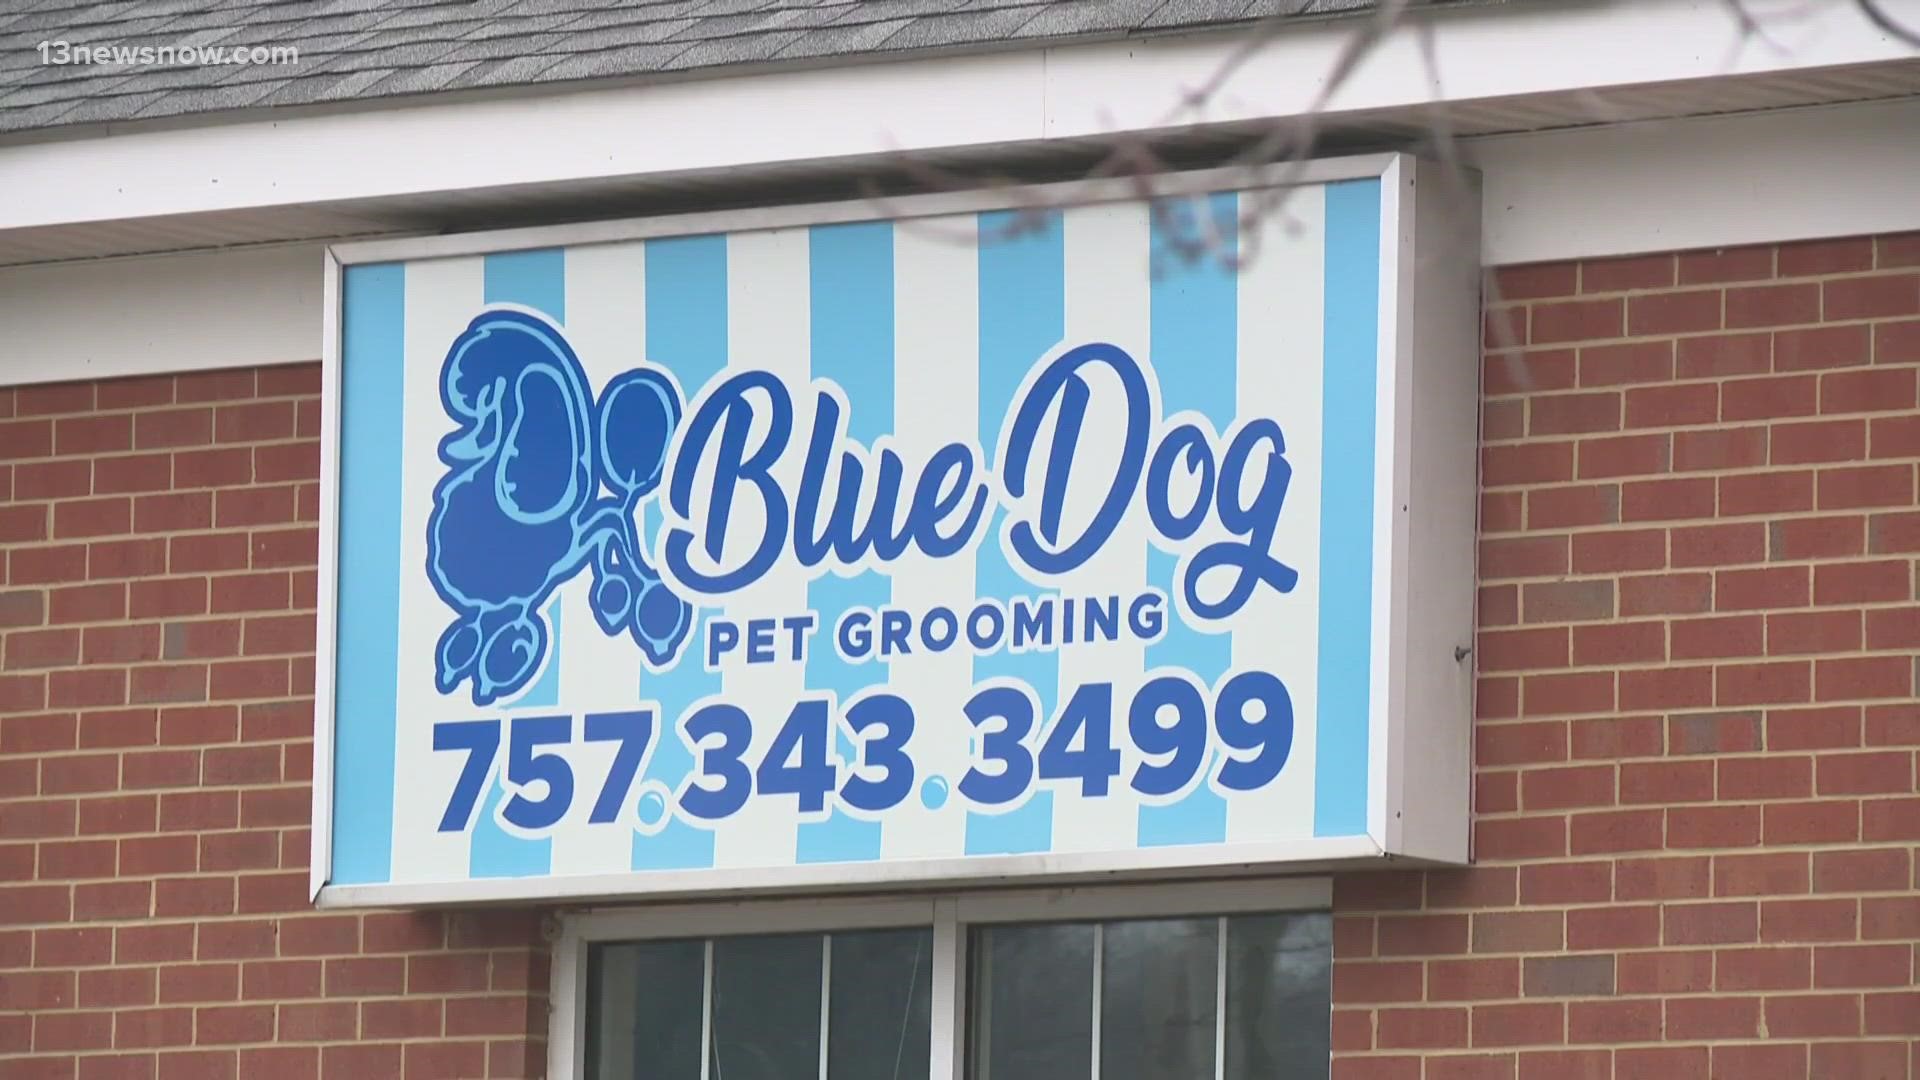 The owners of Blue Dog Pet Grooming in Virginia Beach pleaded guilty to 15 criminal charges of not providing adequate care to their pets.